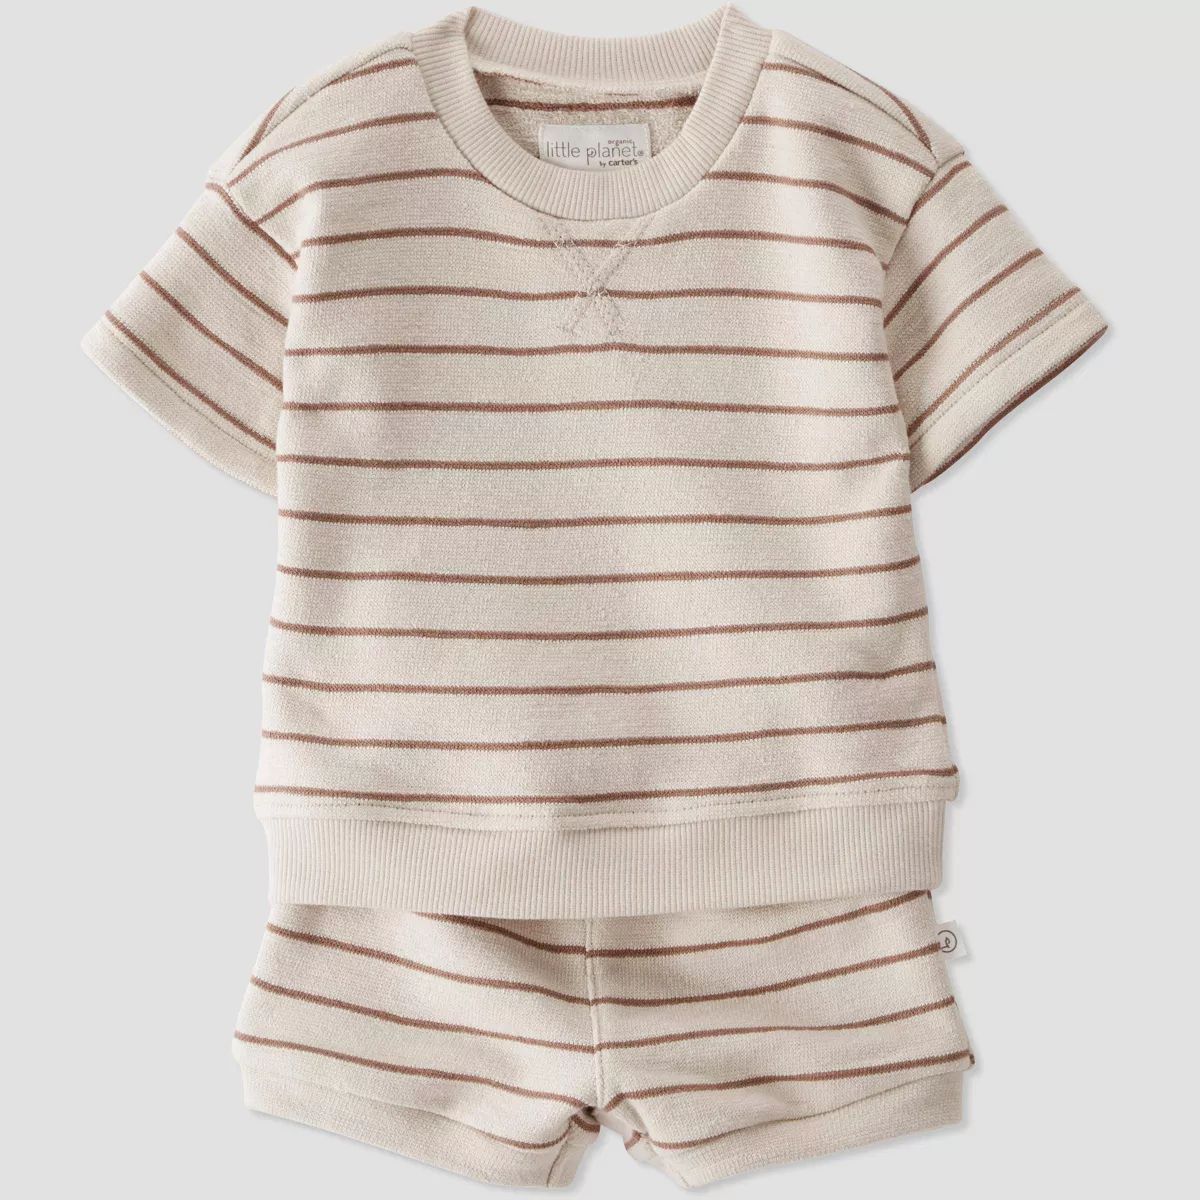 Little Planet by Carter's Organic Baby 2pc Striped Shorts Set - Brown 9M | Target